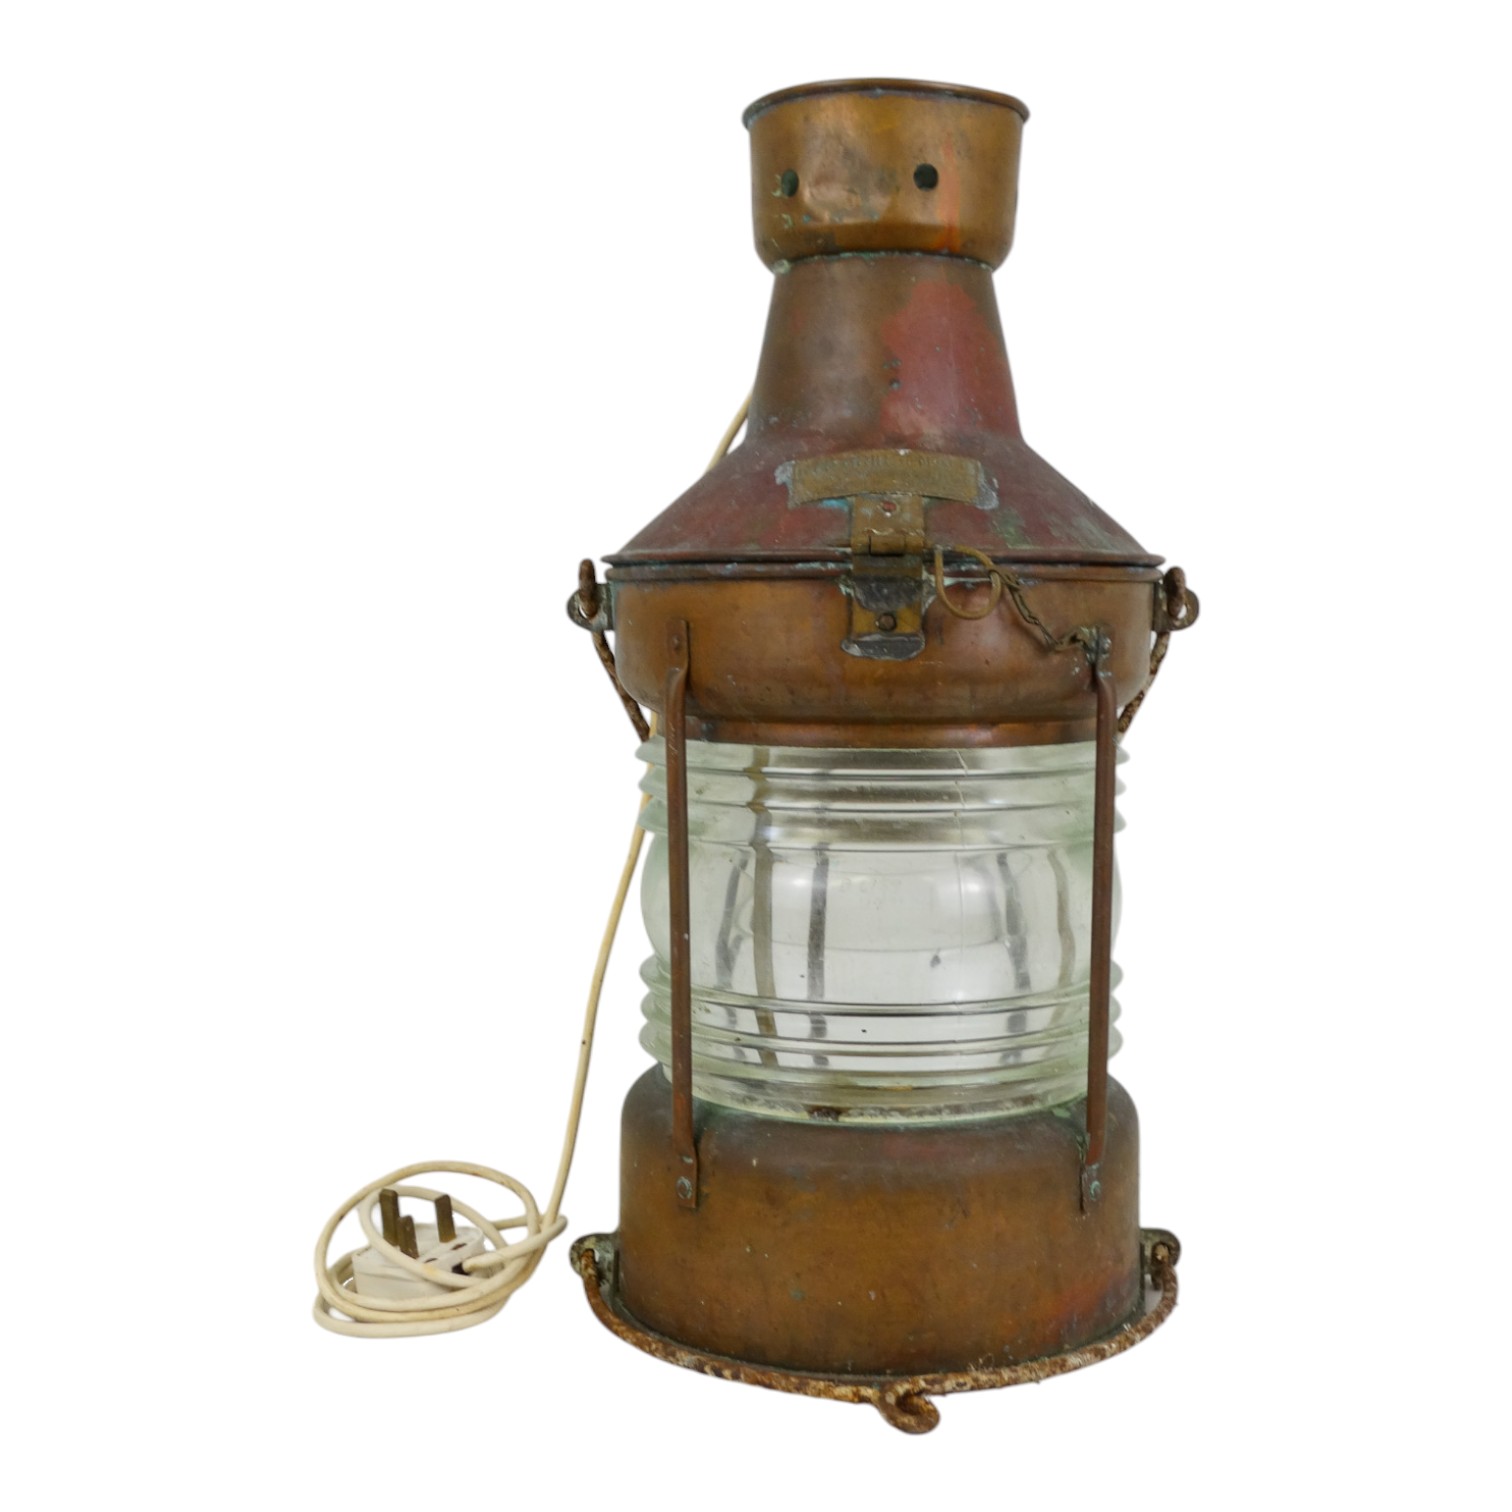 An early 20th century masthead light by H. Henriksen - copper with wrought steel handles,